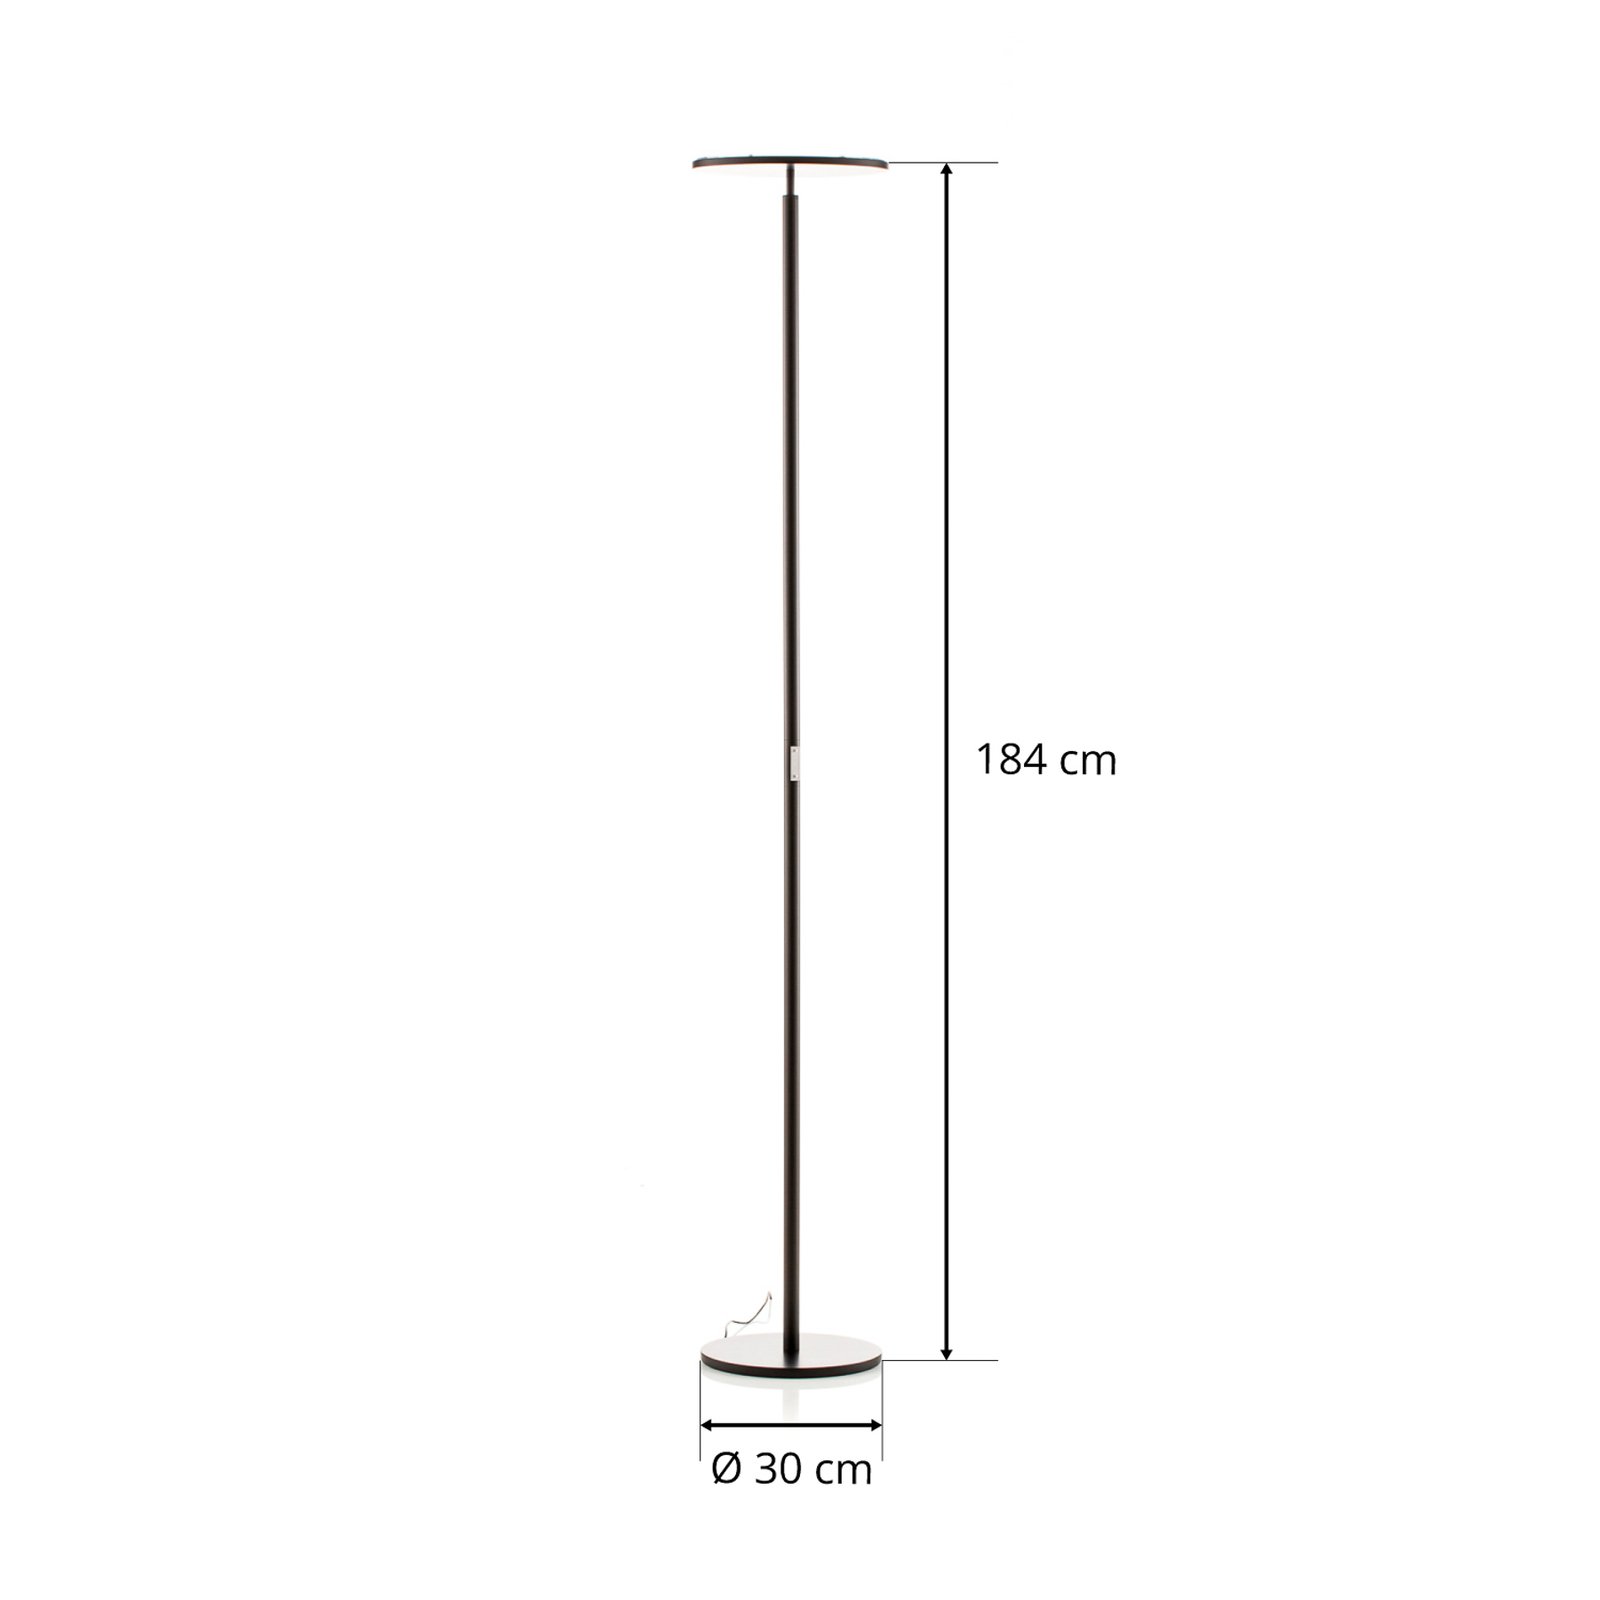 Apollon LED uplighter floor lamp with gesture control